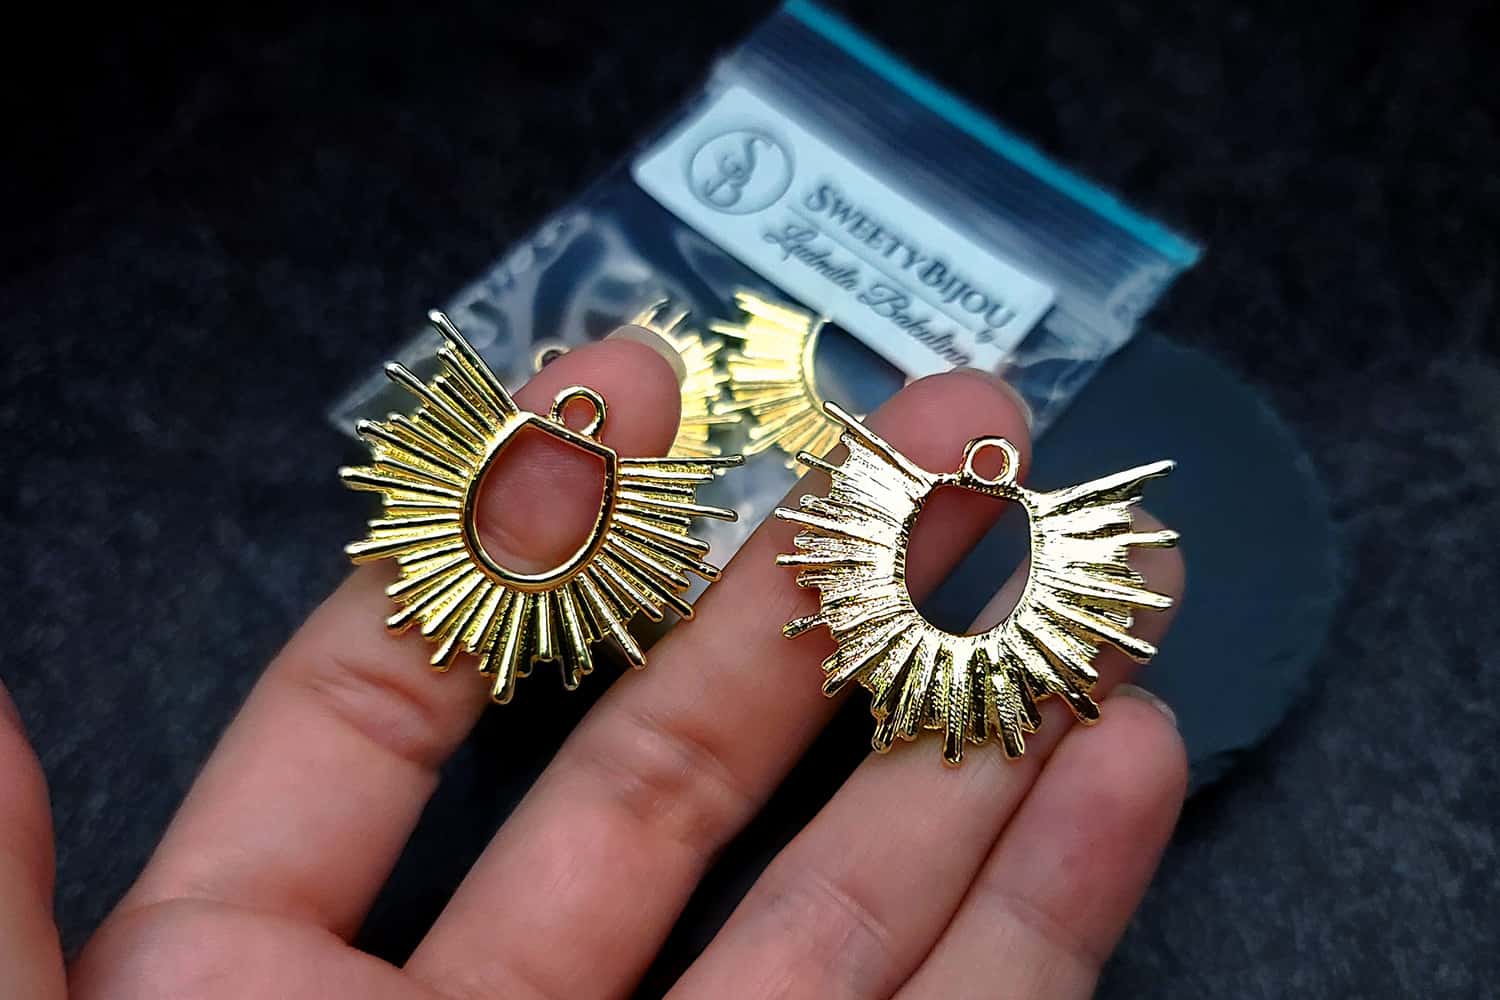 Pair of golden color half-sun charms for earrings (27259)